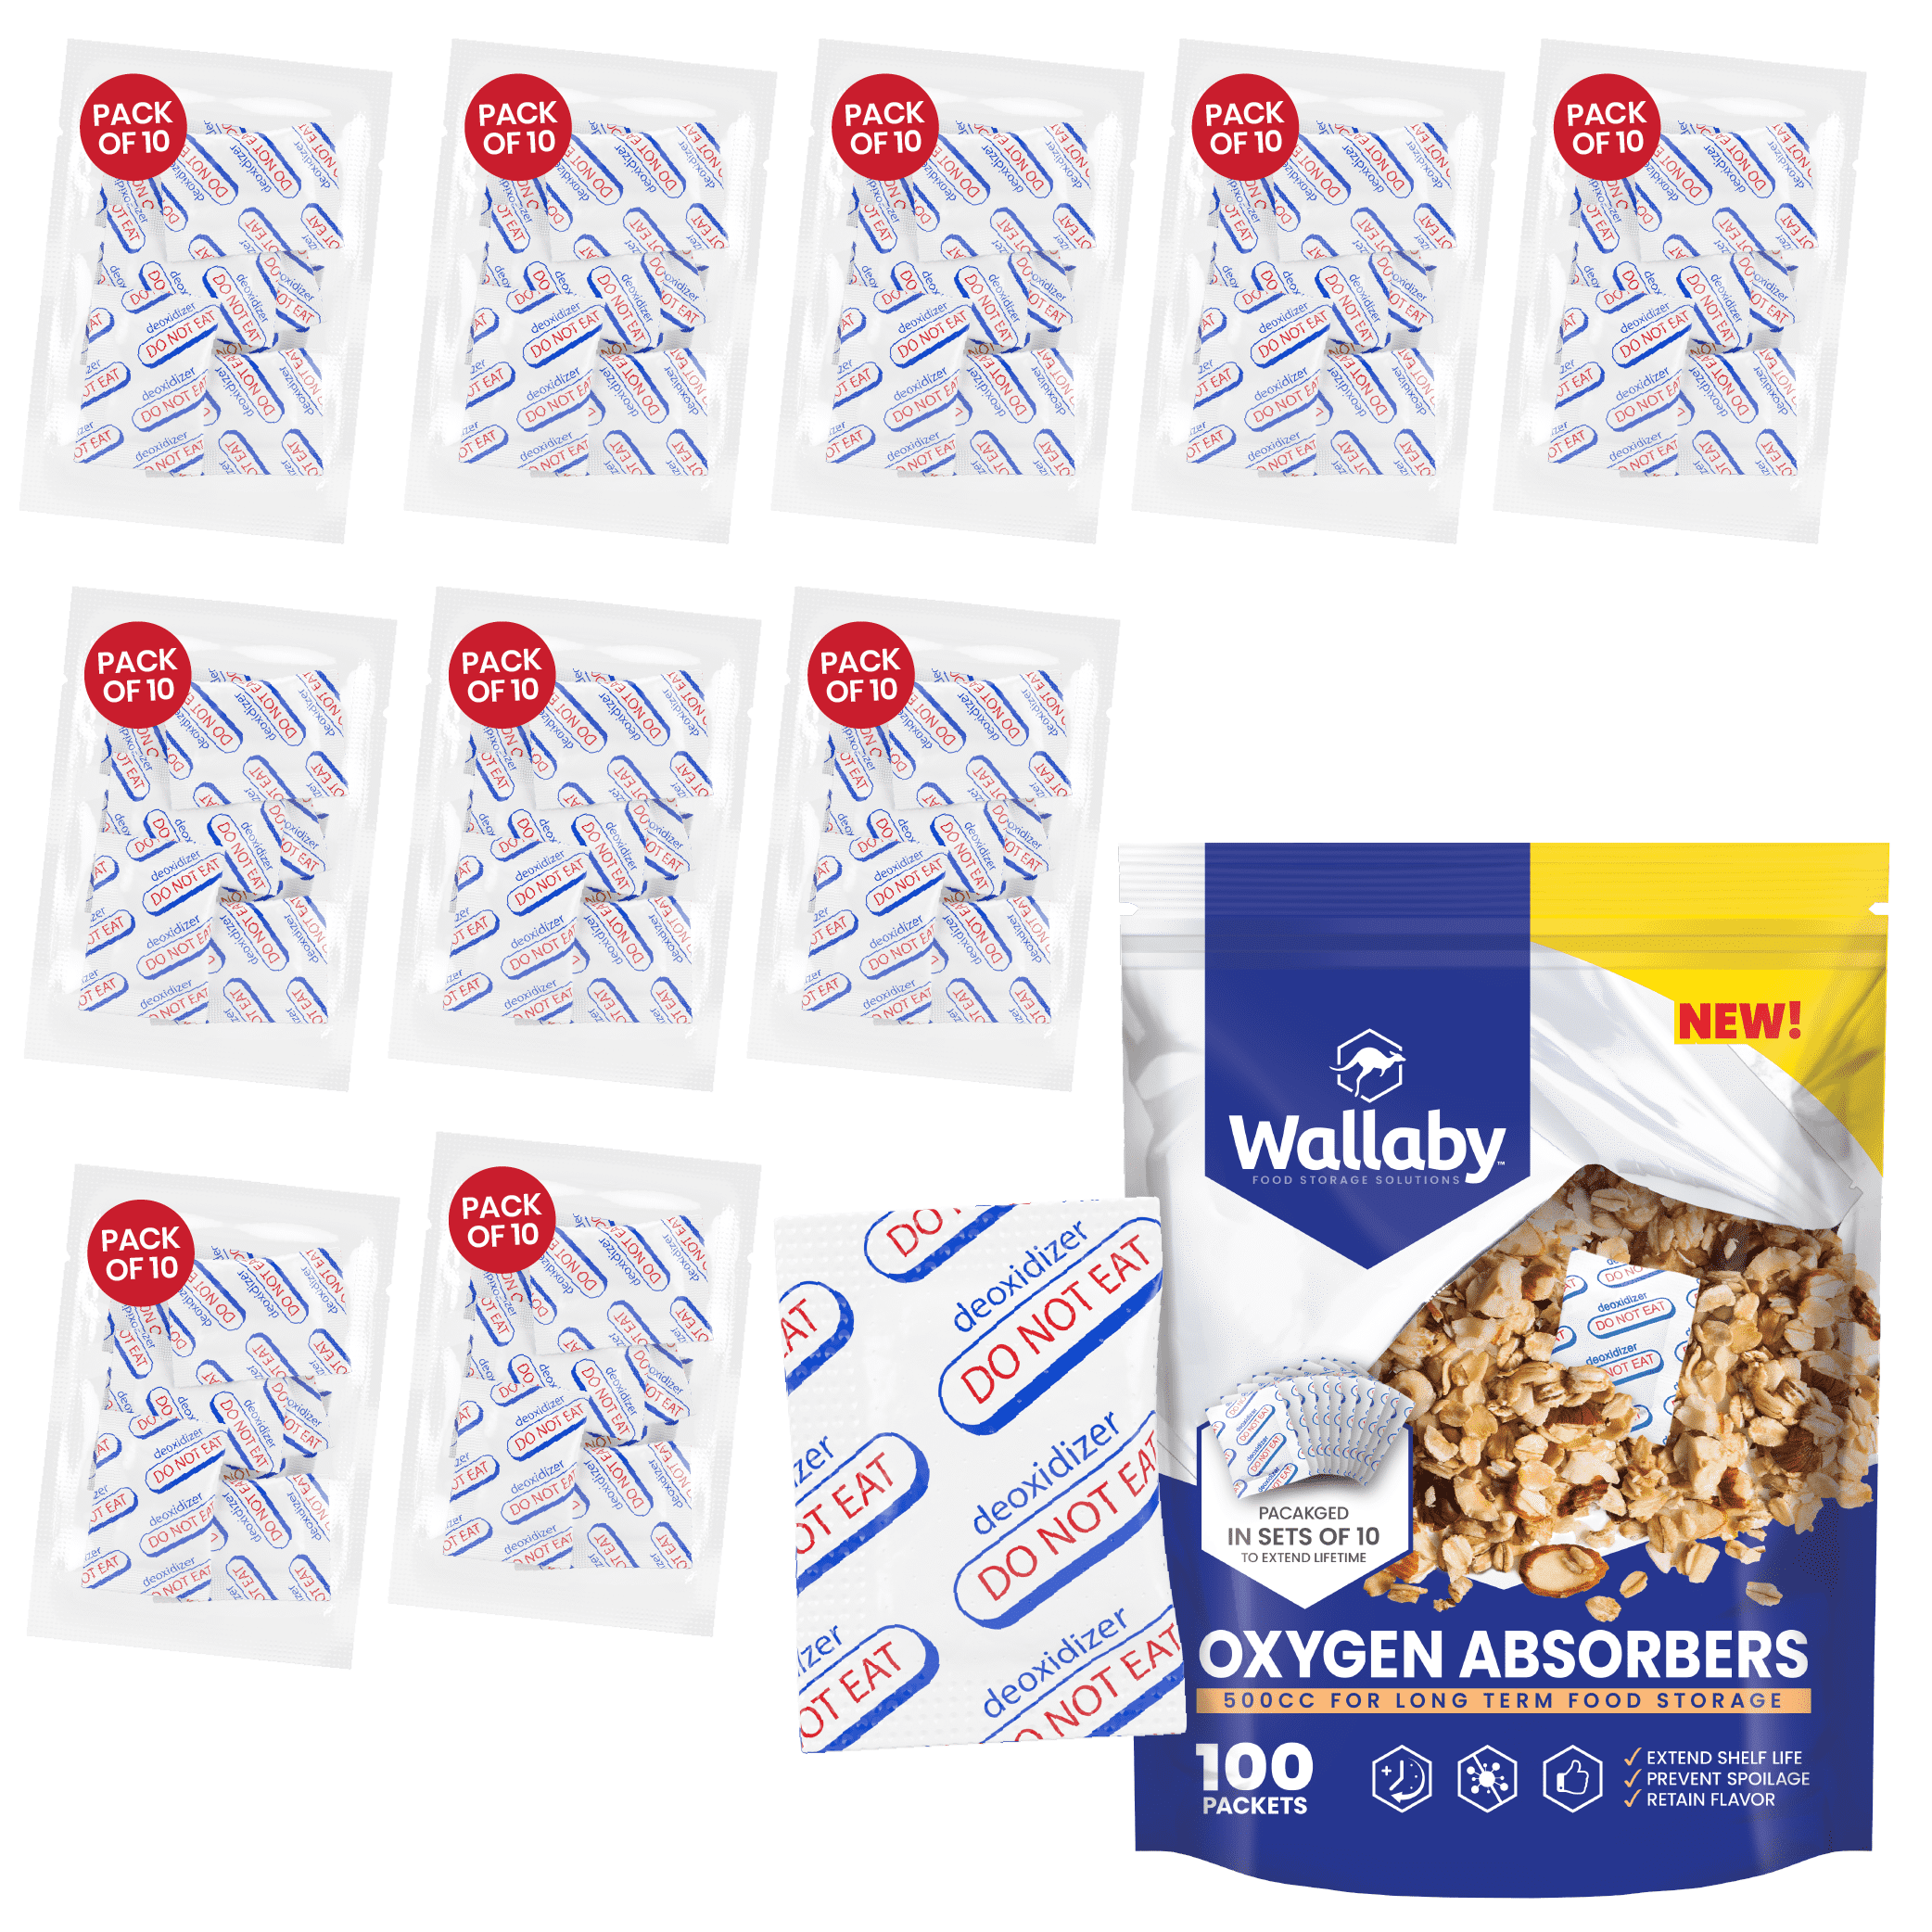 10X 5 Gallon Mylar Bags & Oxygen Absorbers Combo Preppers Food Long Term Storage 